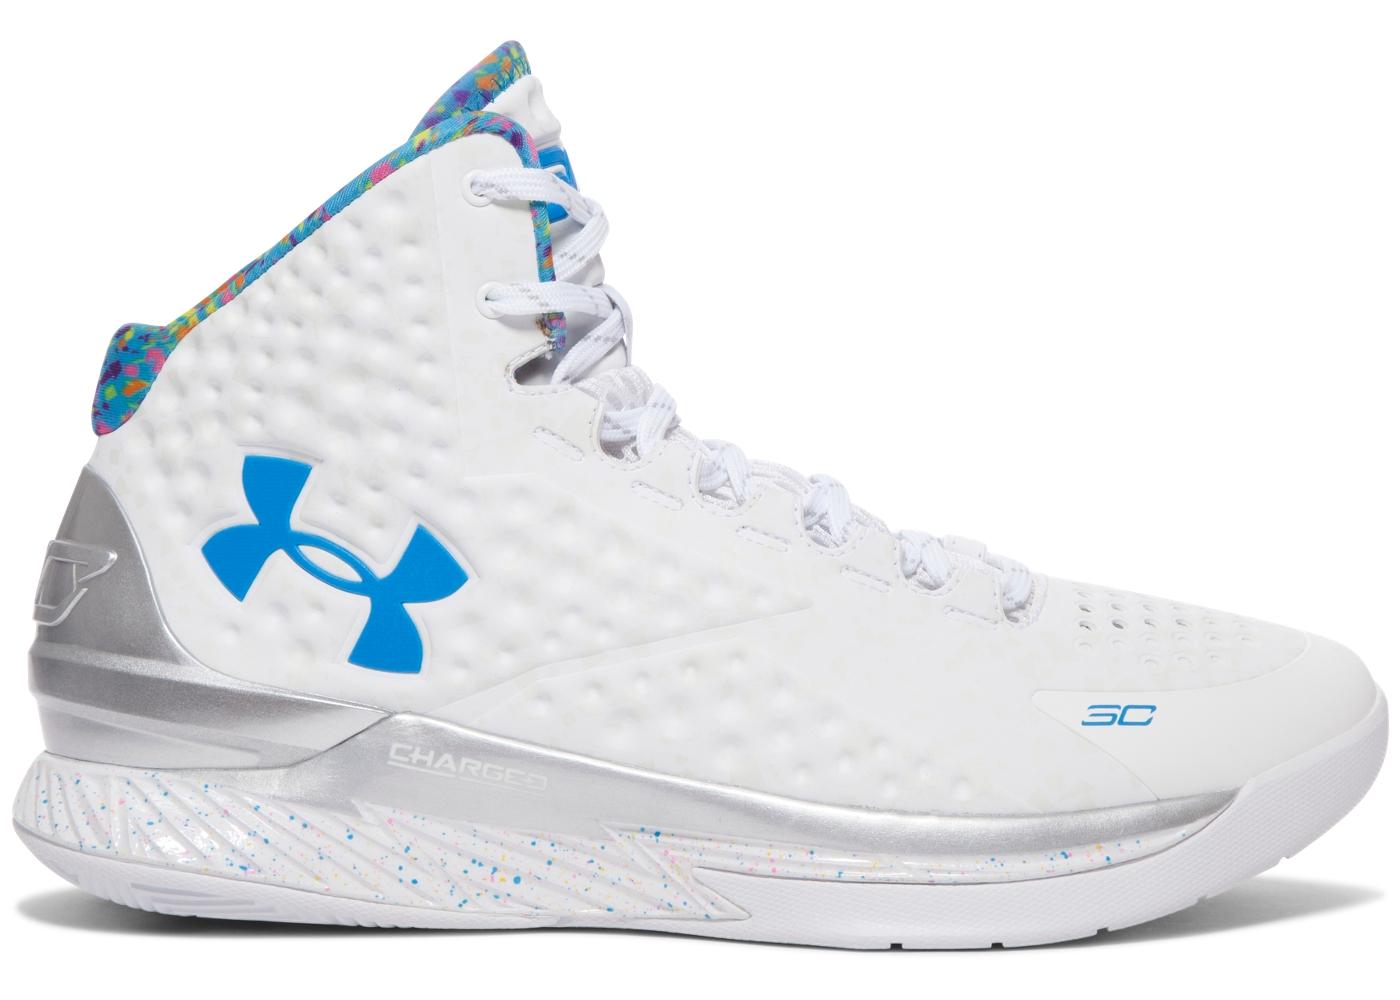 Under Armour Ua Curry 1 Splash Party in White/Metallic Silver-Blue ...